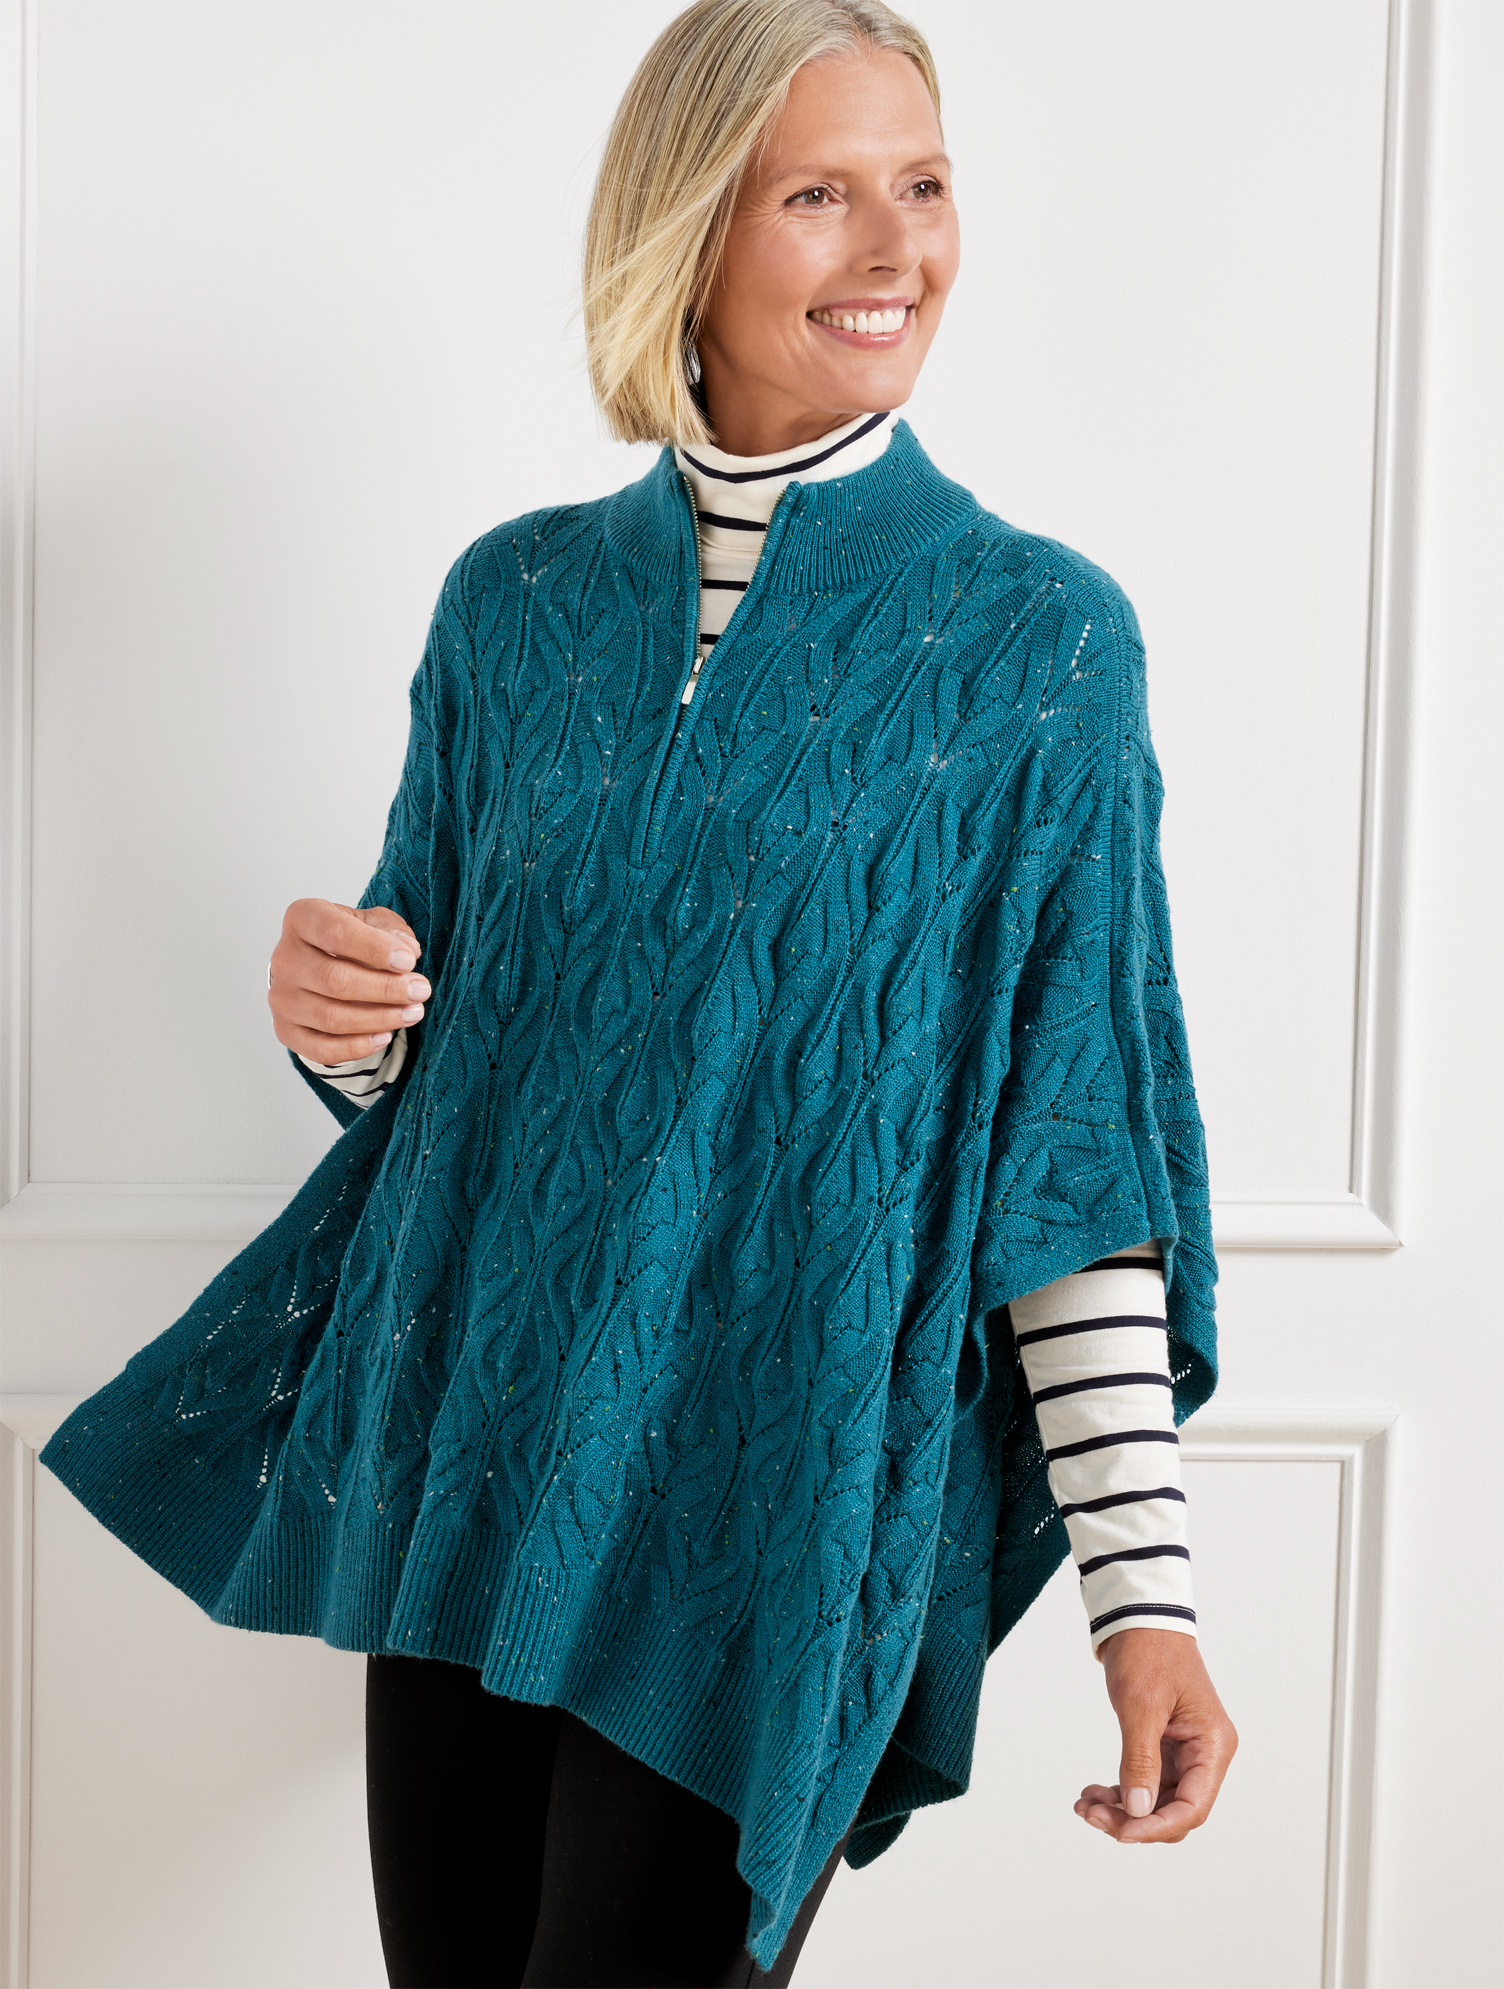 Talbots Cable Knit Poncho - Teal Ocean Tweed - Large